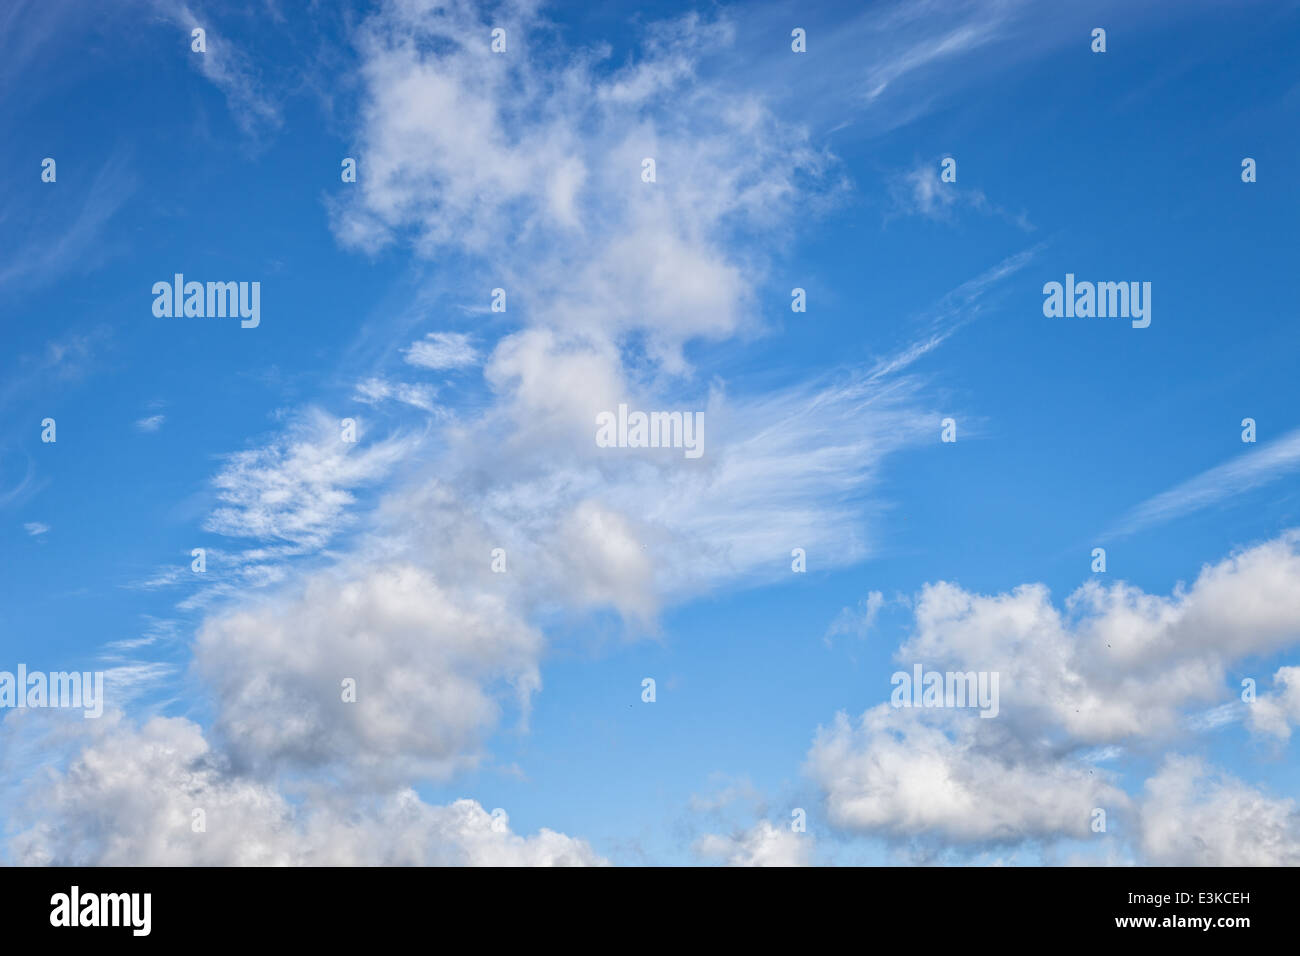 Blue sky with clouds background nice weather concept. Stock Photo